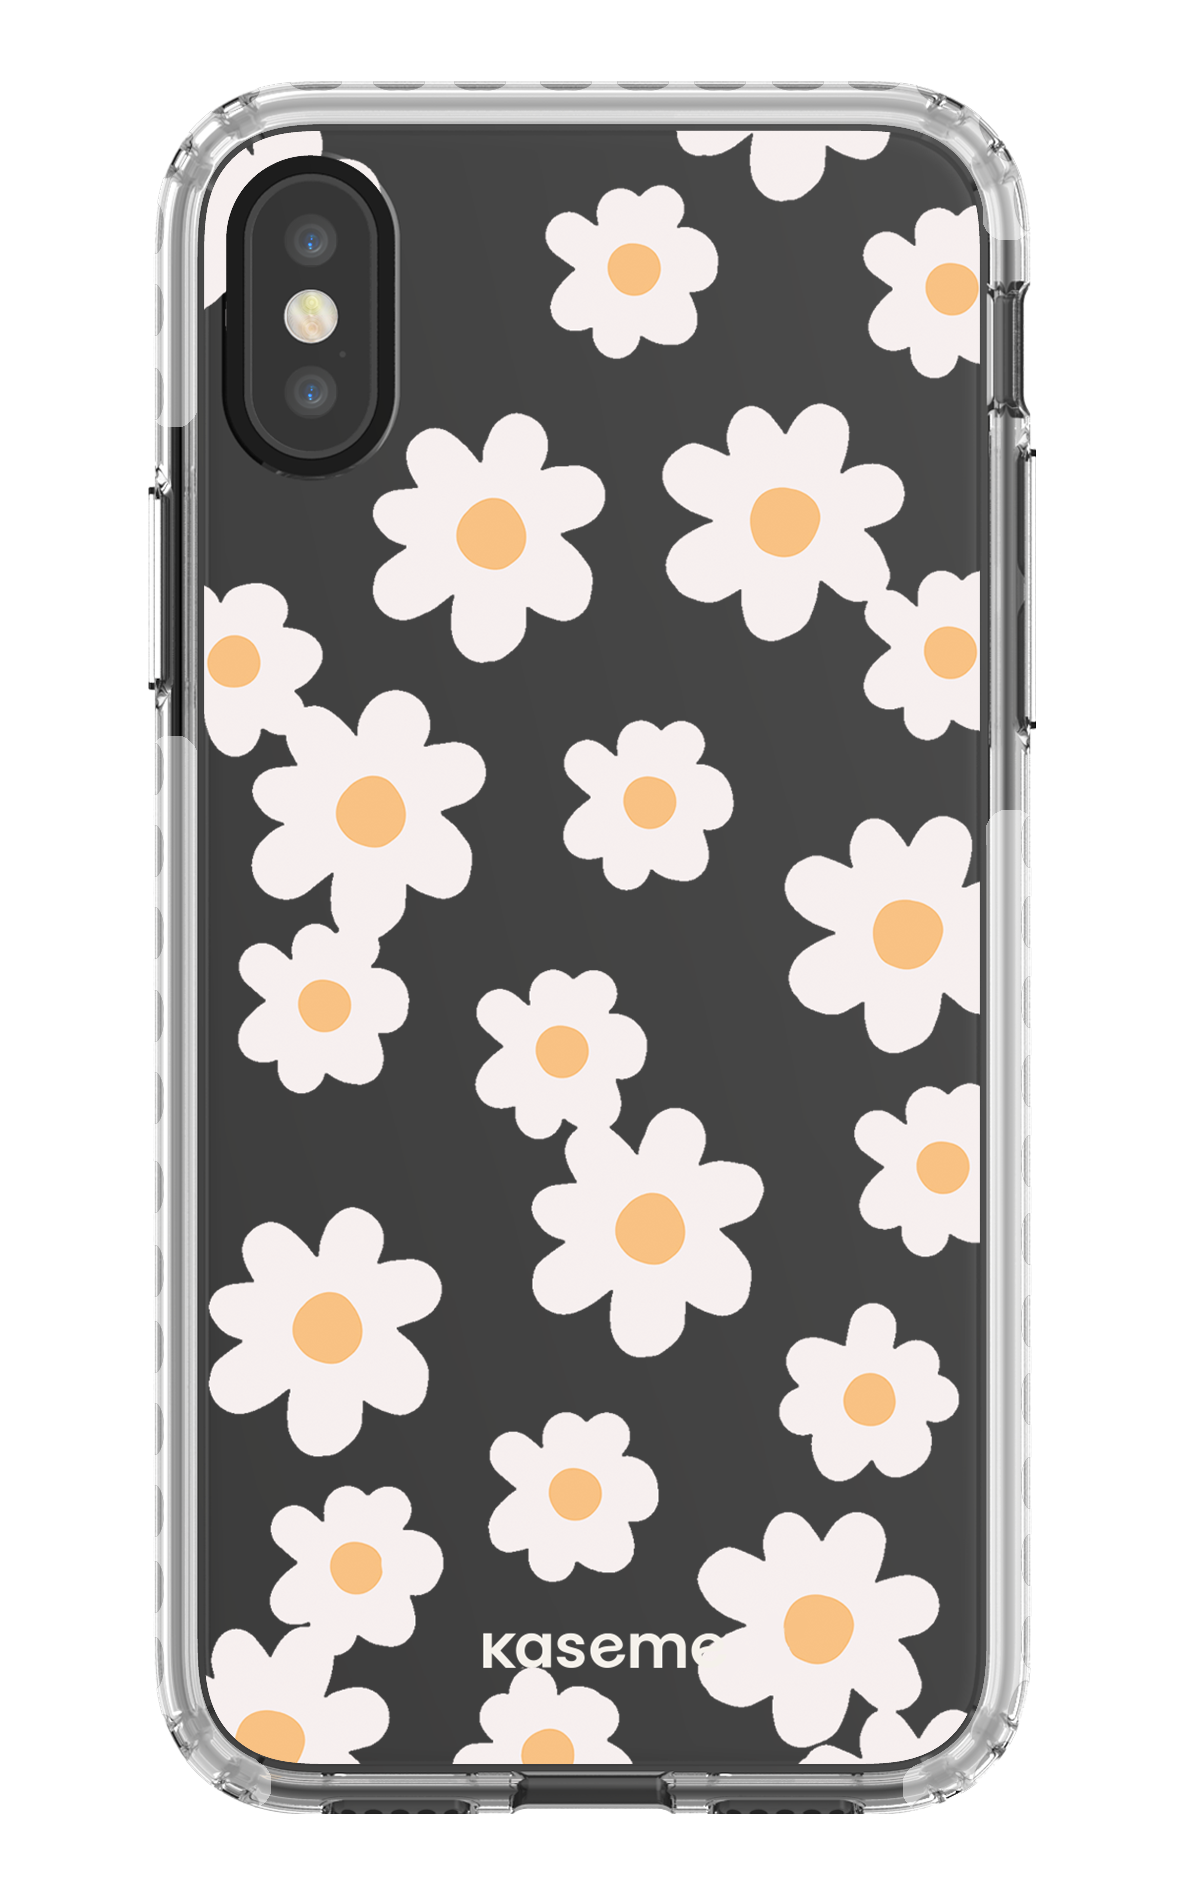 May Clear Case - iPhone X/Xs